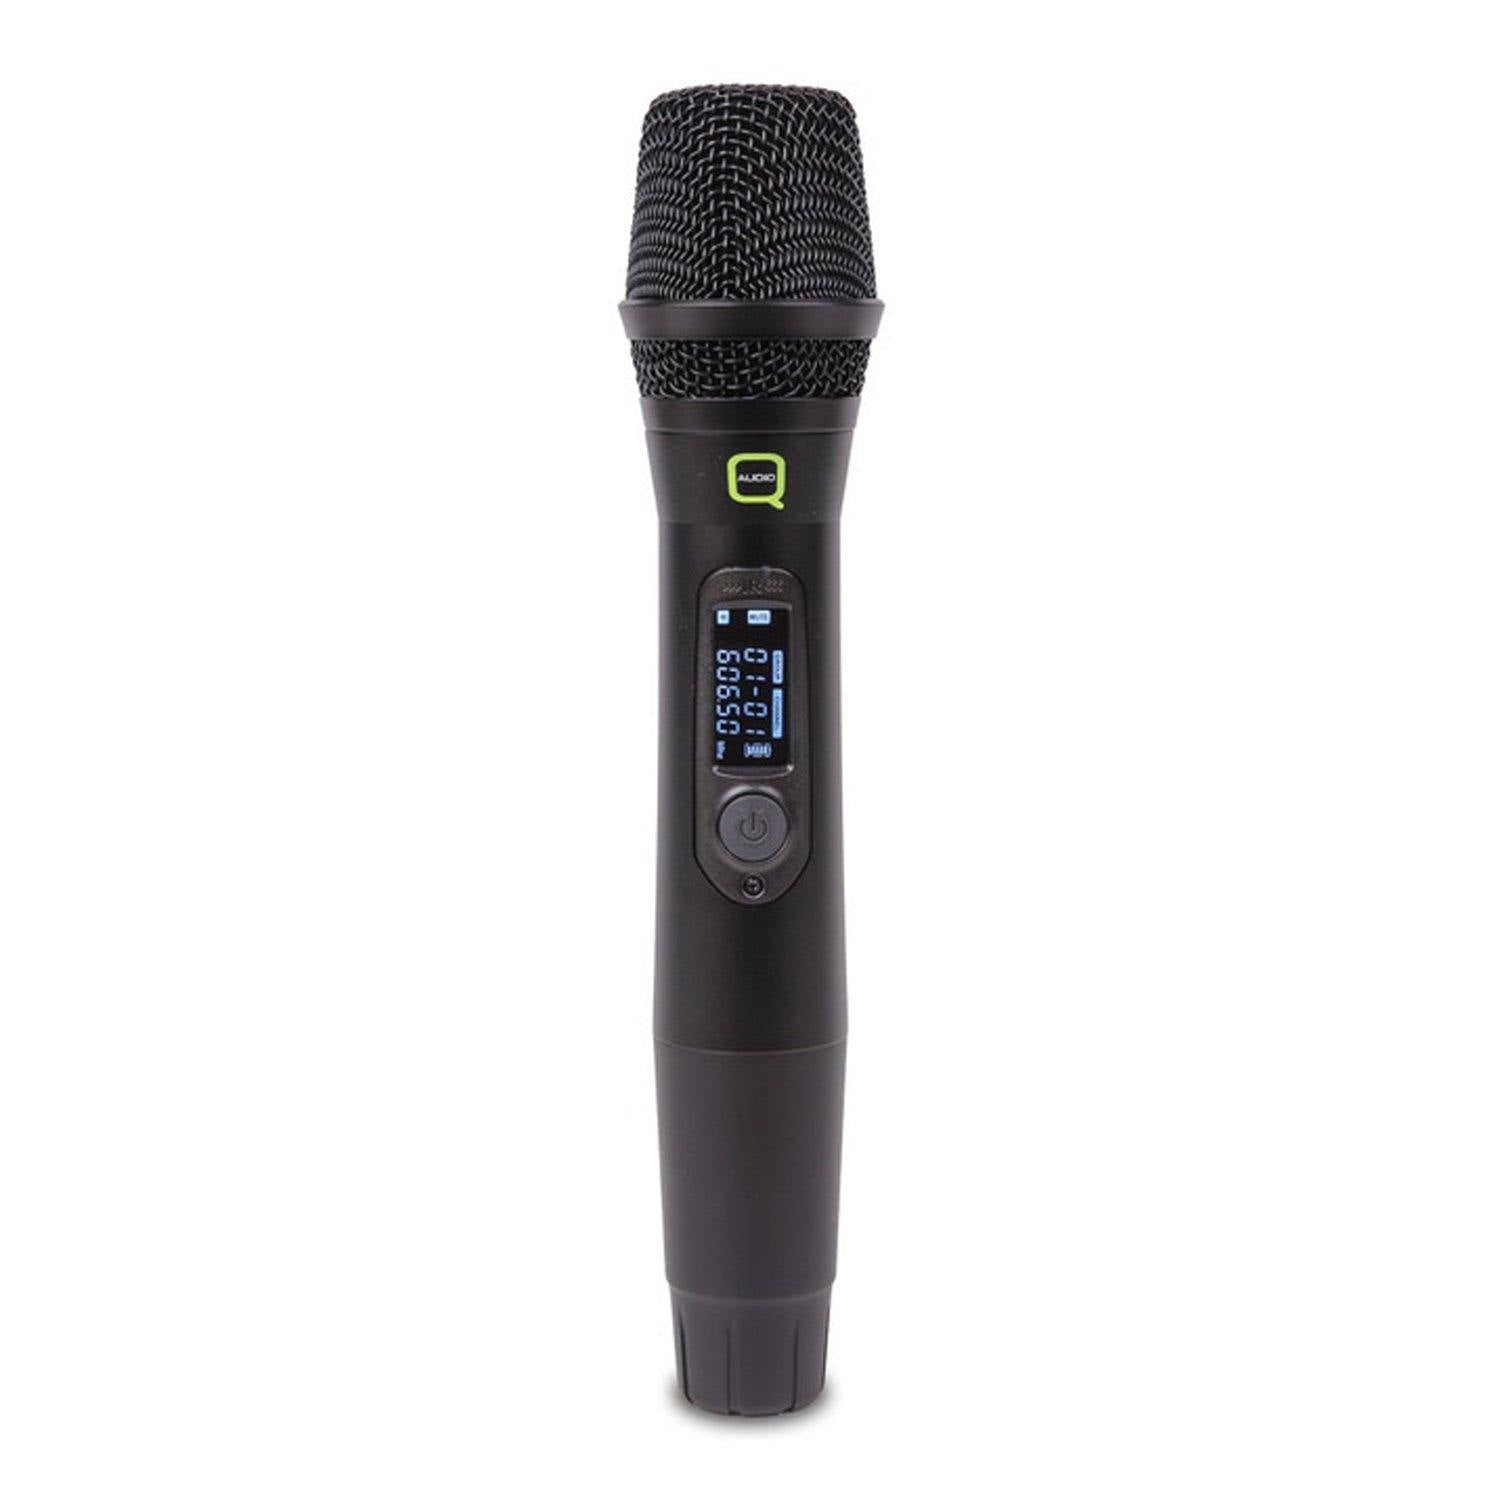 Q-Audio QWM1950 Twin Handheld UHF Wireless Microphone Channel 38 (606.5-613.5 MHz) - DY Pro Audio